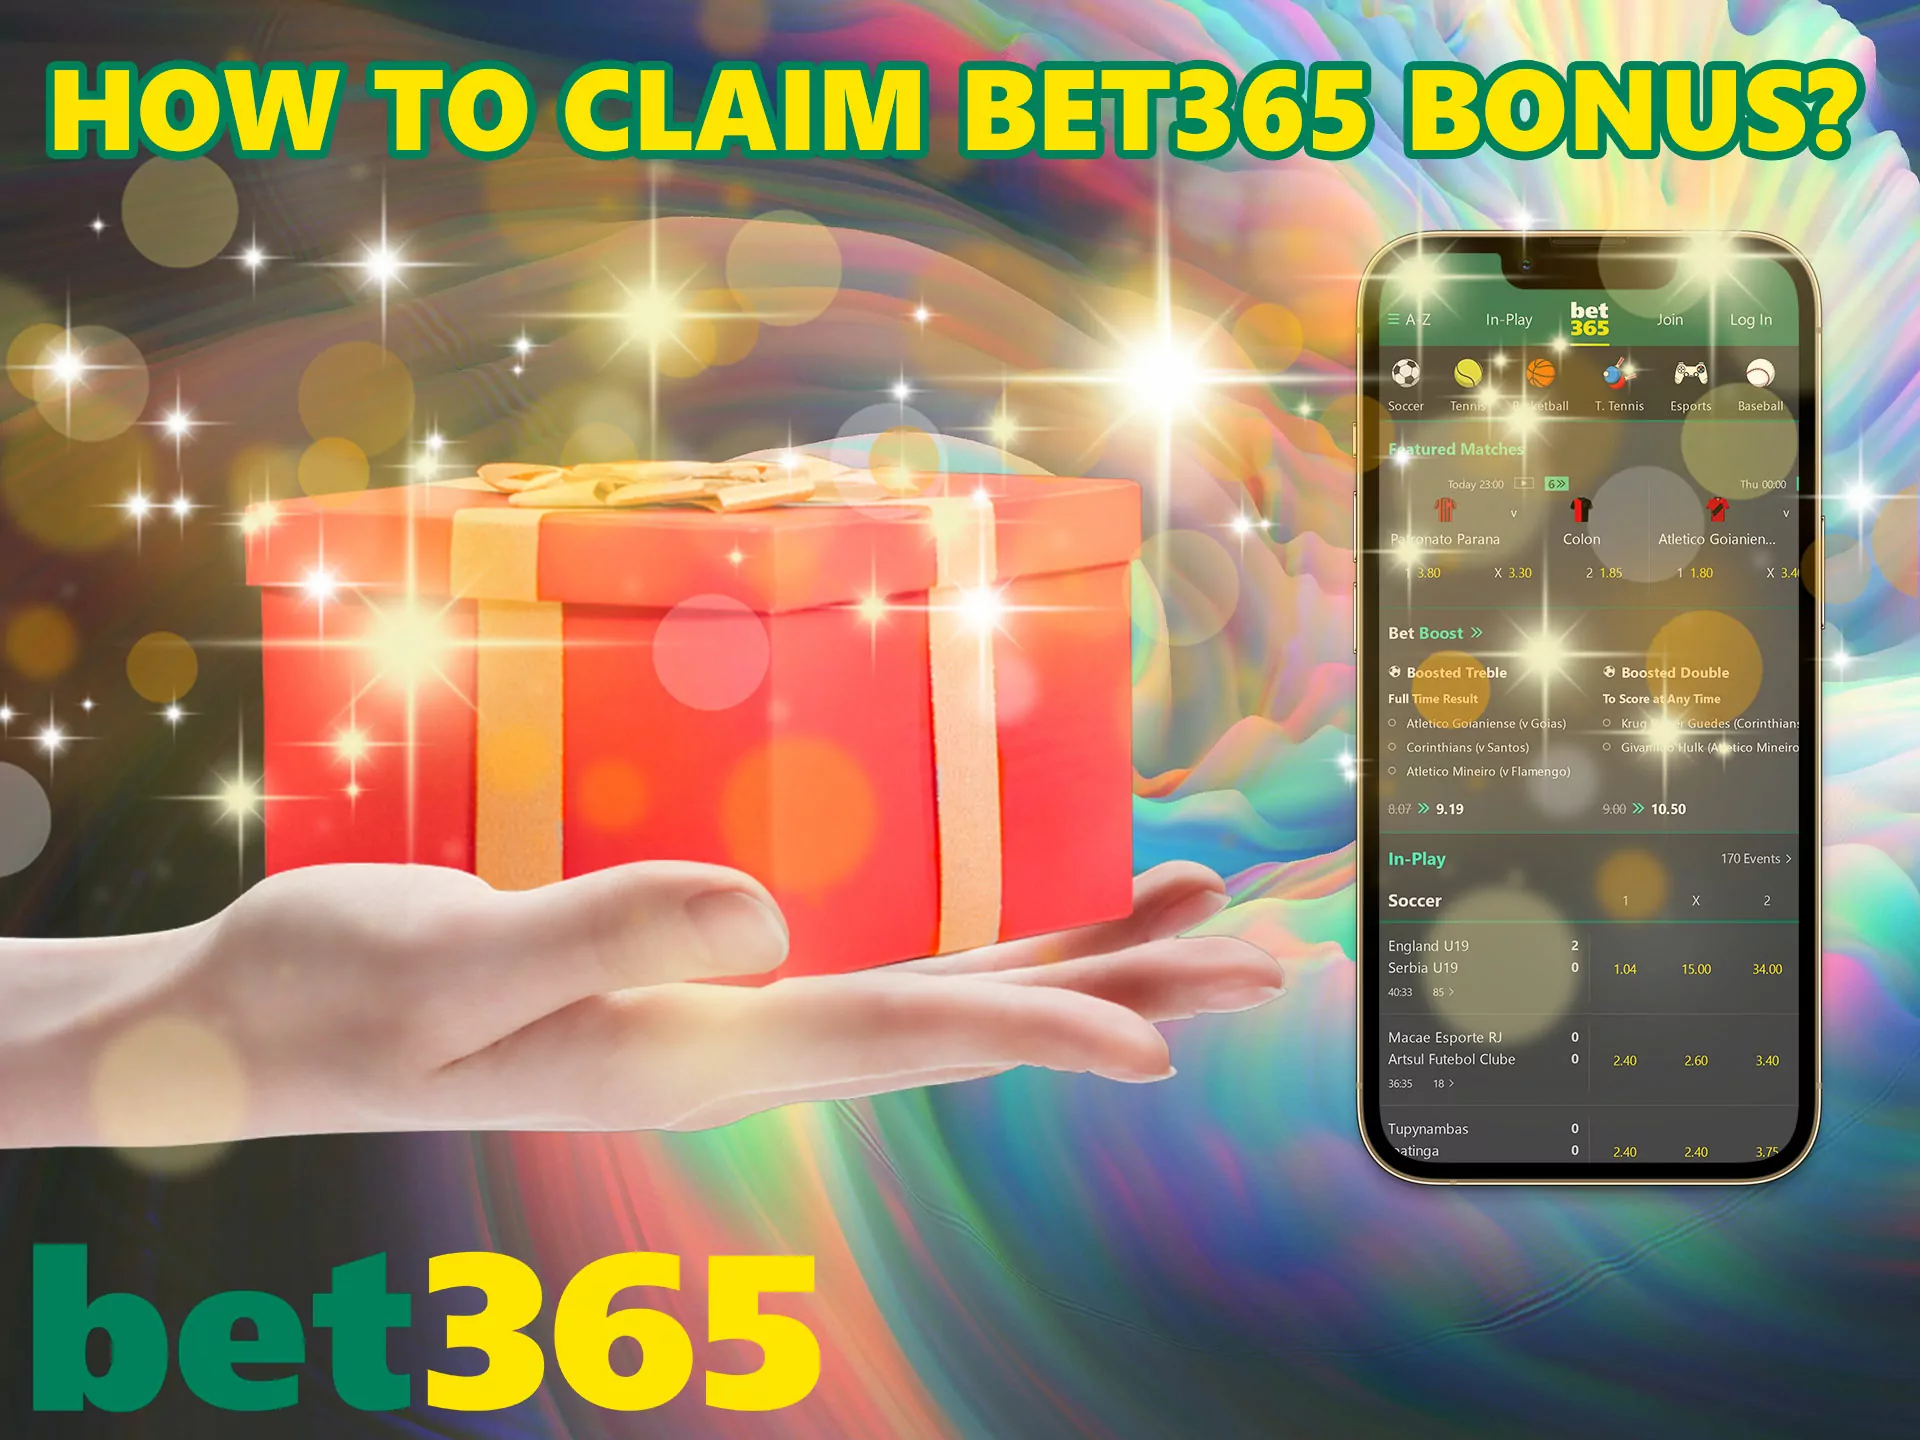 To claim your Bet365 bonus, simply follow the instructions below.